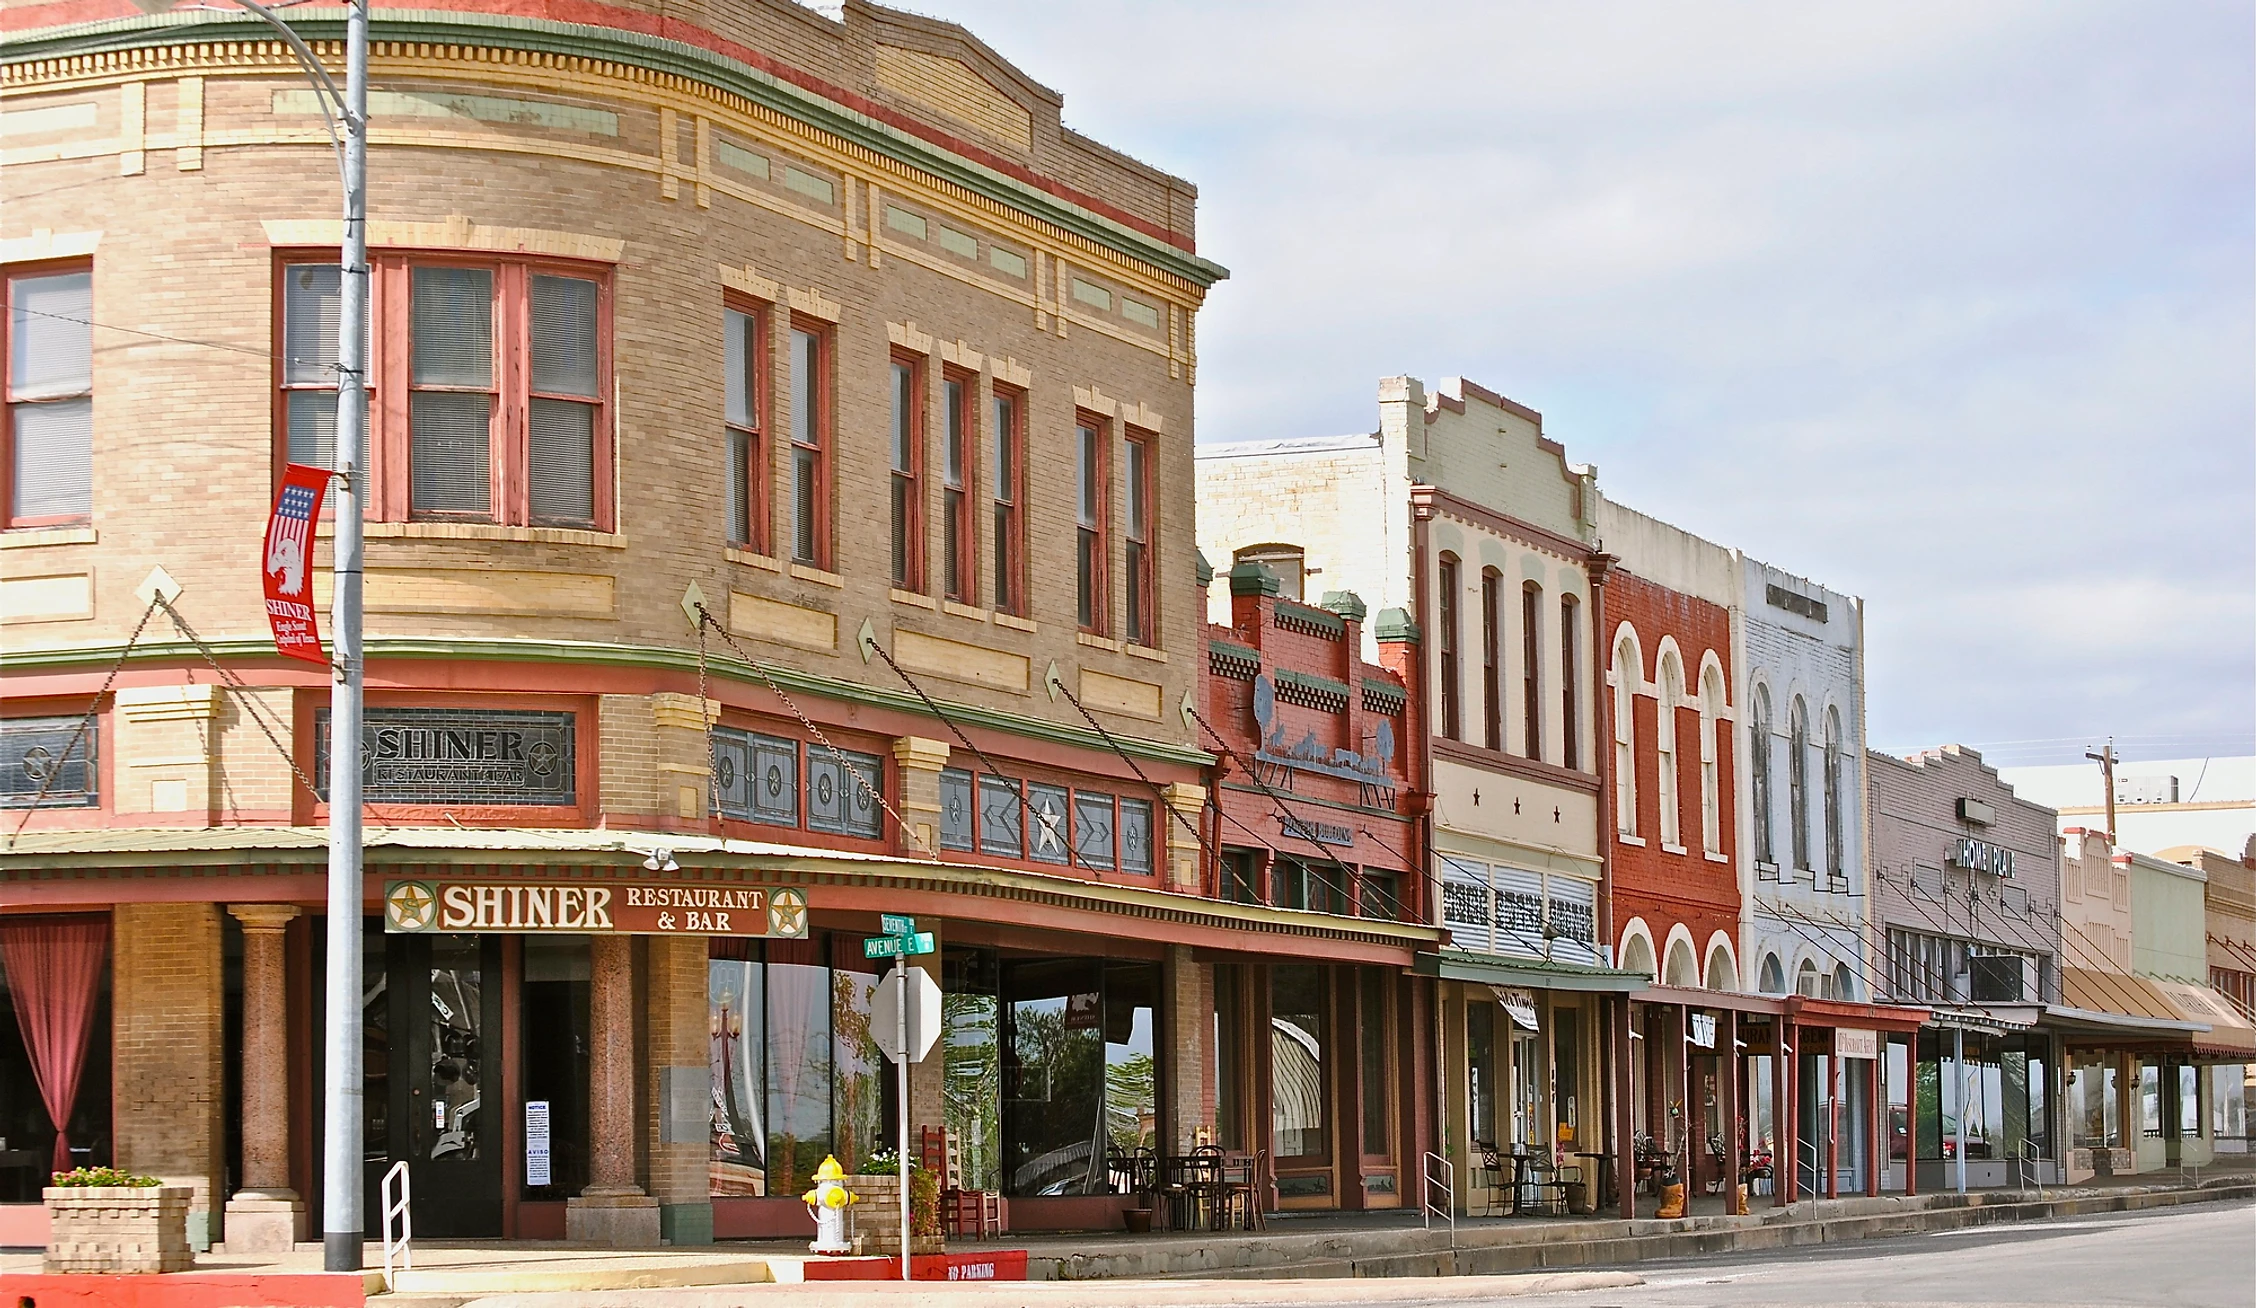 Street view of a historic downtown block in Shiner, featuring a row of old-fashioned buildings with distinctive architecture.